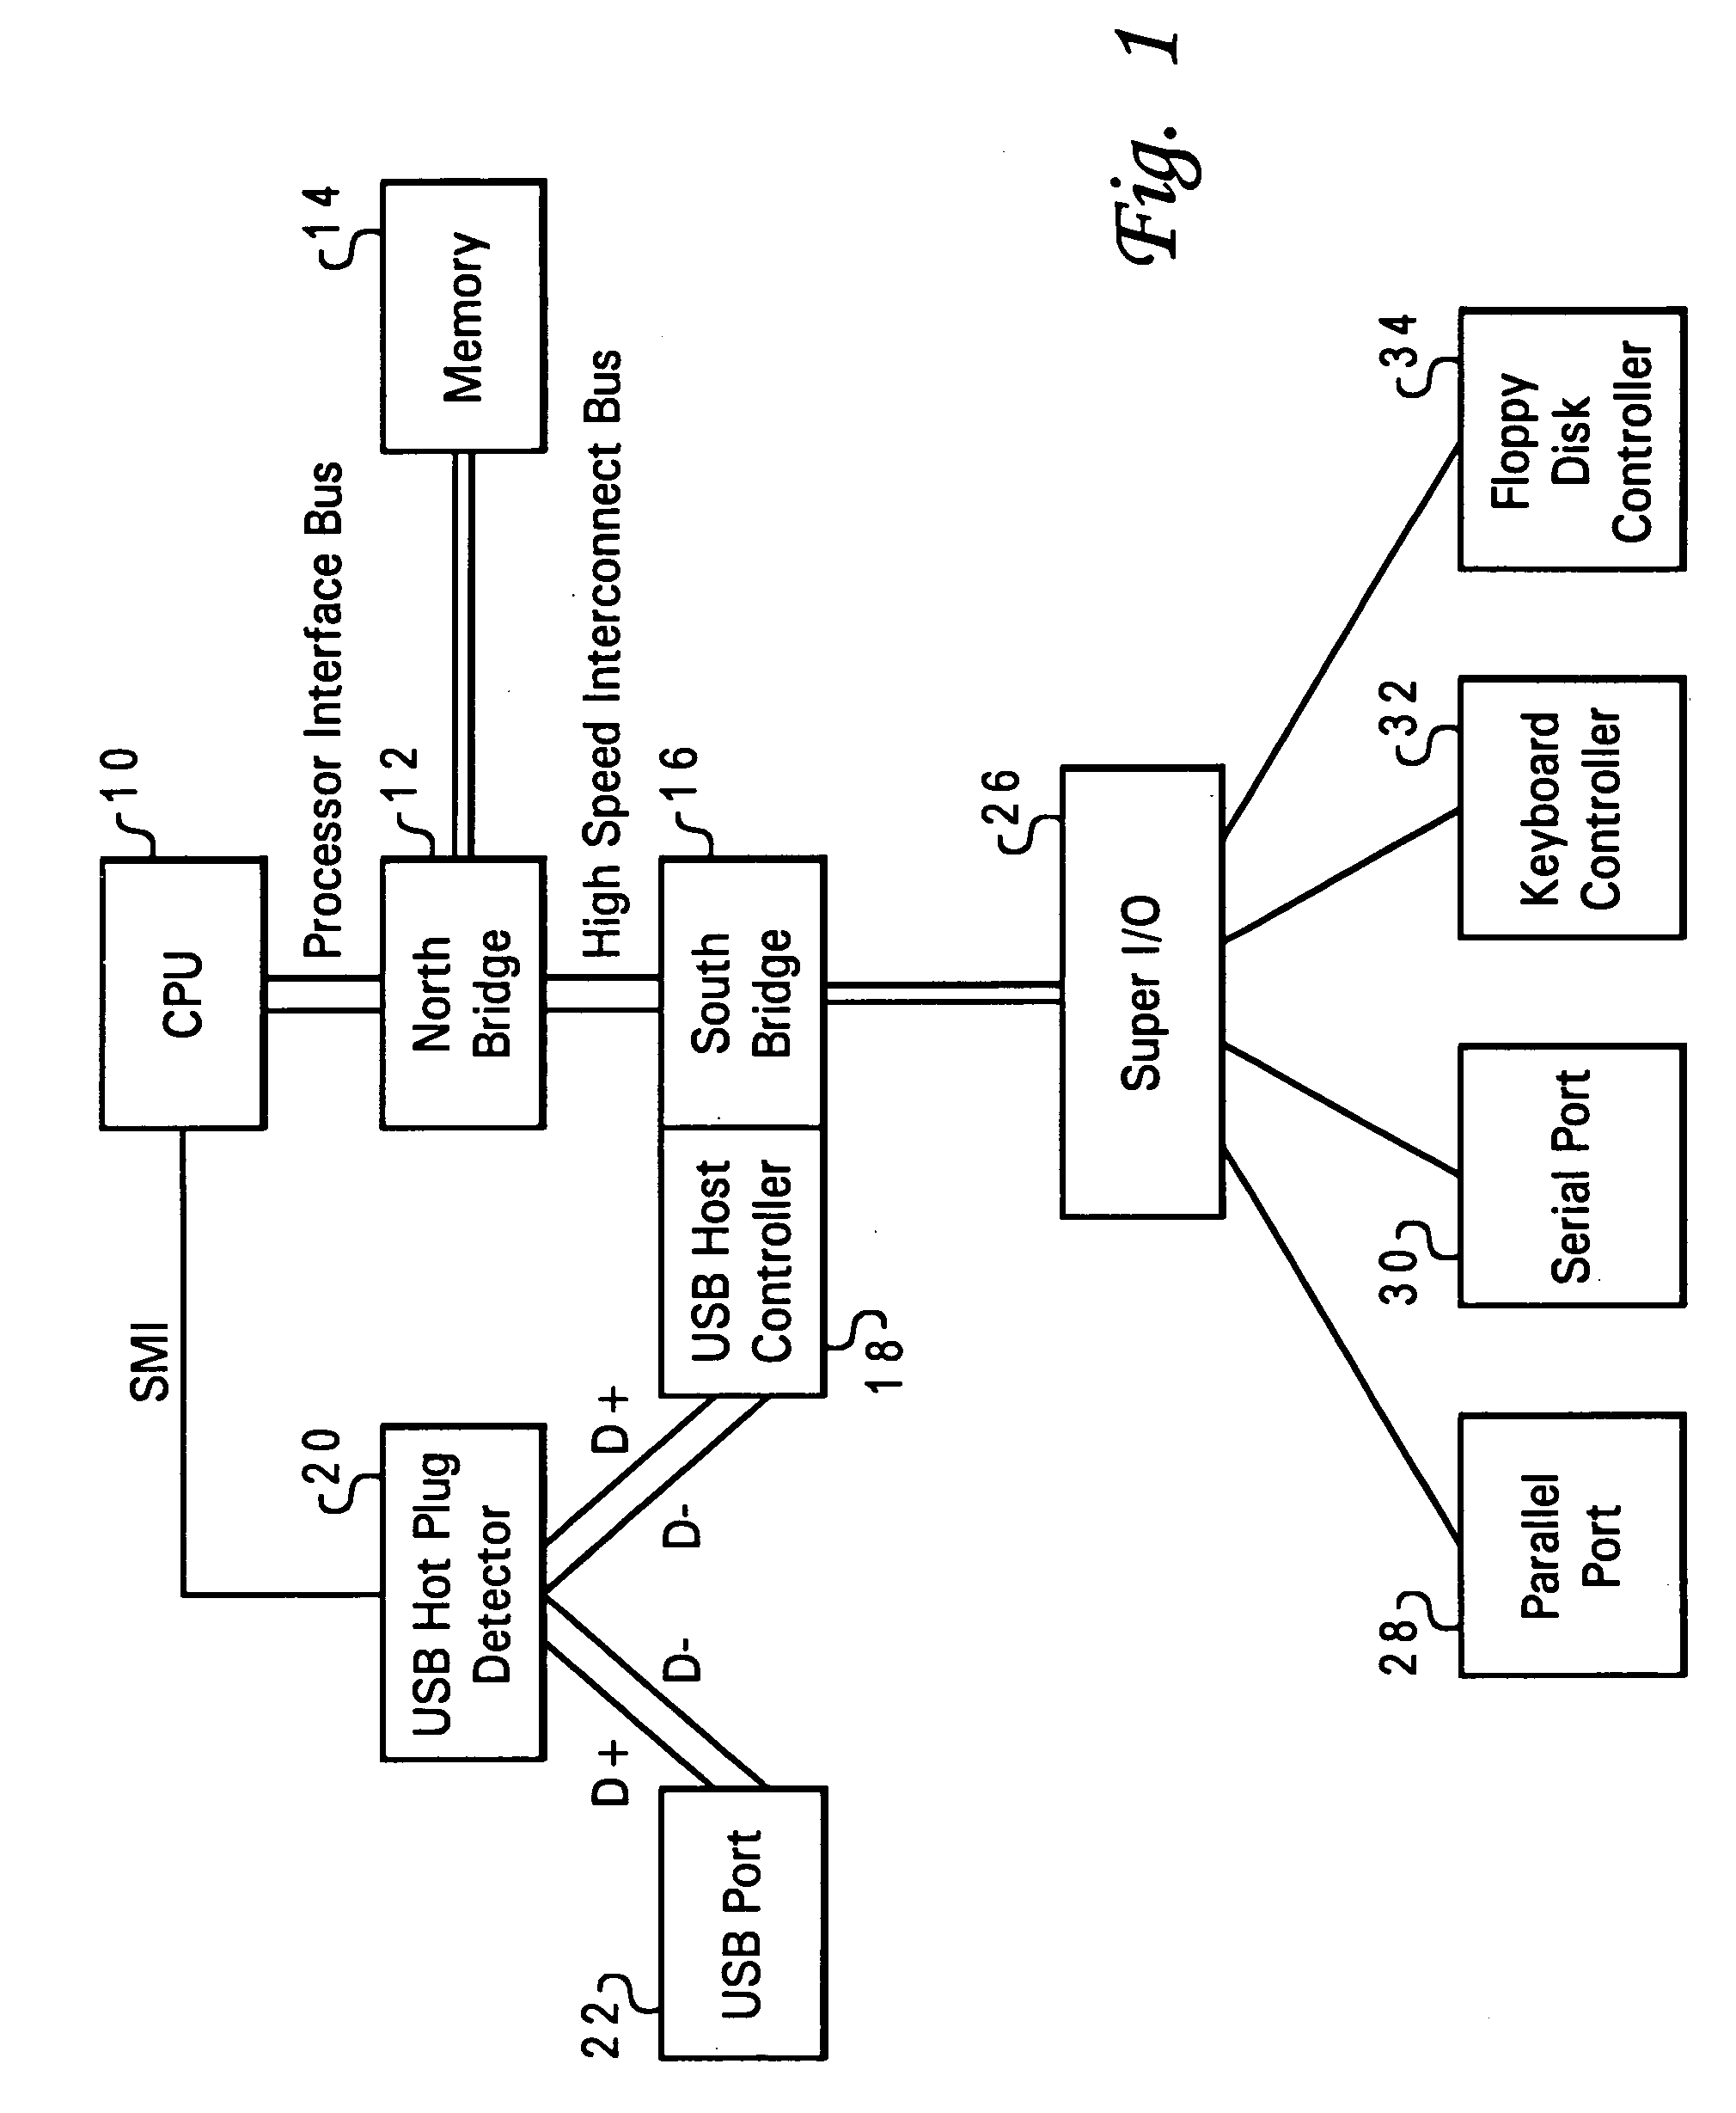 System and method for connecting a universal serial bus device to a host computer system